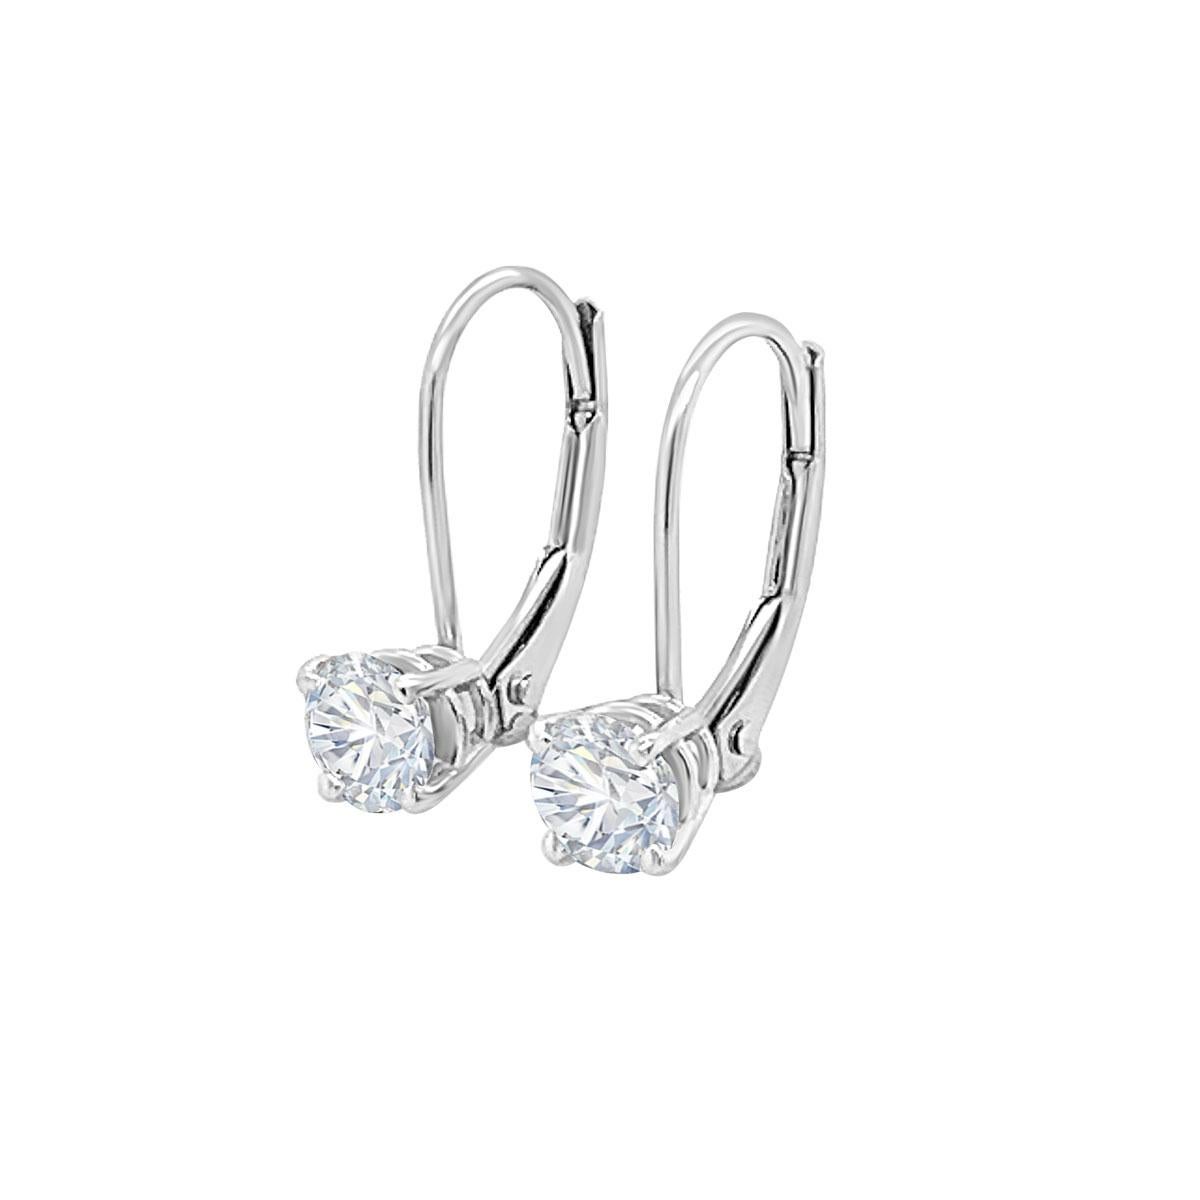 An easy-to-wear style of these lever-back drop-style earrings features two perfectly matched 0.32 carat of round diamonds.

Product details: 

Center Gemstone Type: NATURAL DIAMOND
Center Gemstone Color: WHITE
Center Gemstone Shape: ROUND
Center